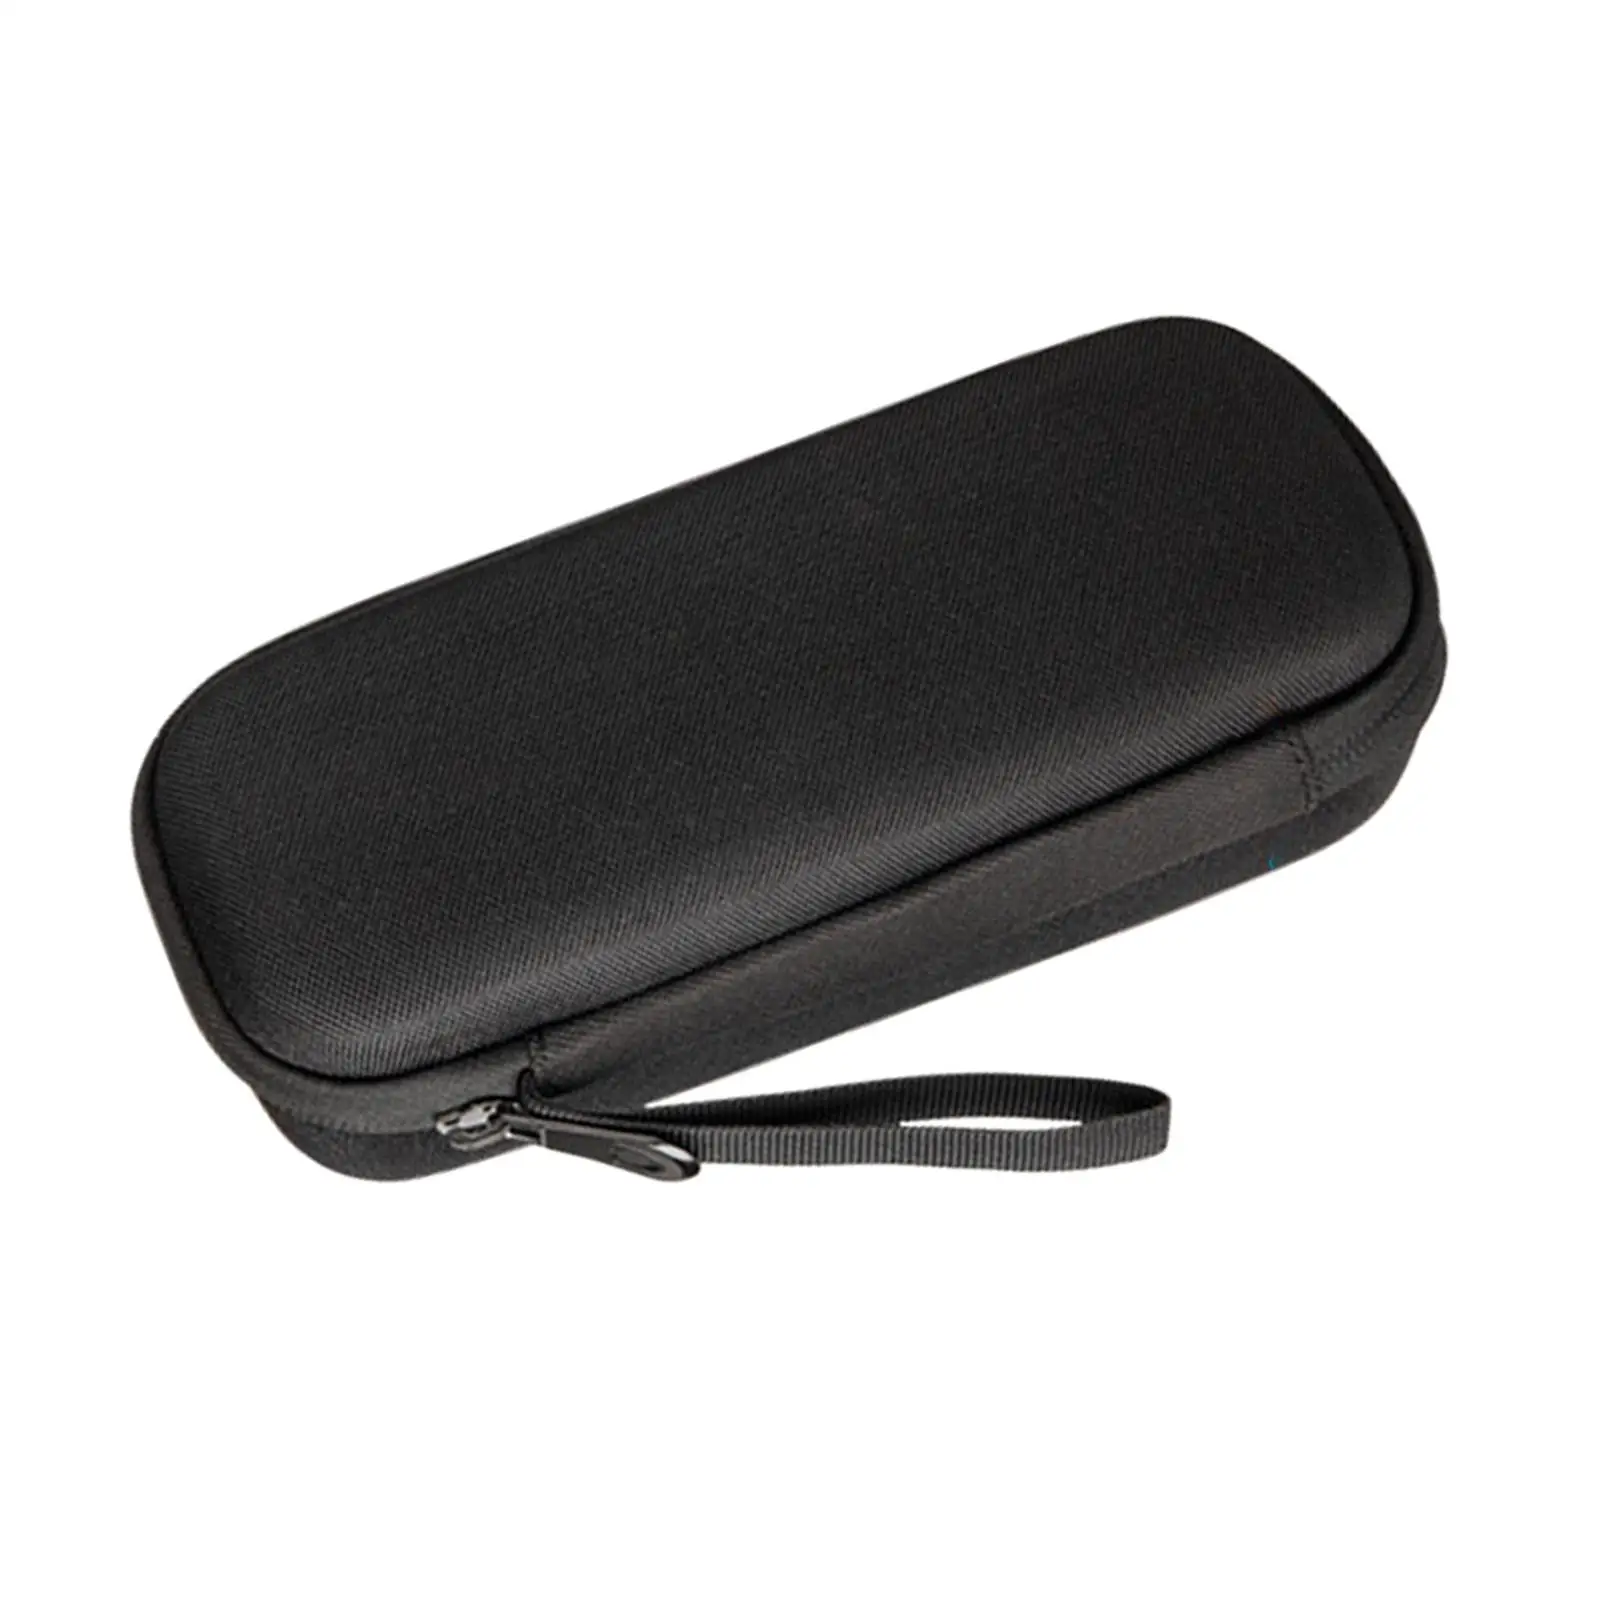 Hard Travel EVA Case Travel Protective Bag Charger Carrying Case Storage Pouch for Cable Earphone Electronic Accessories